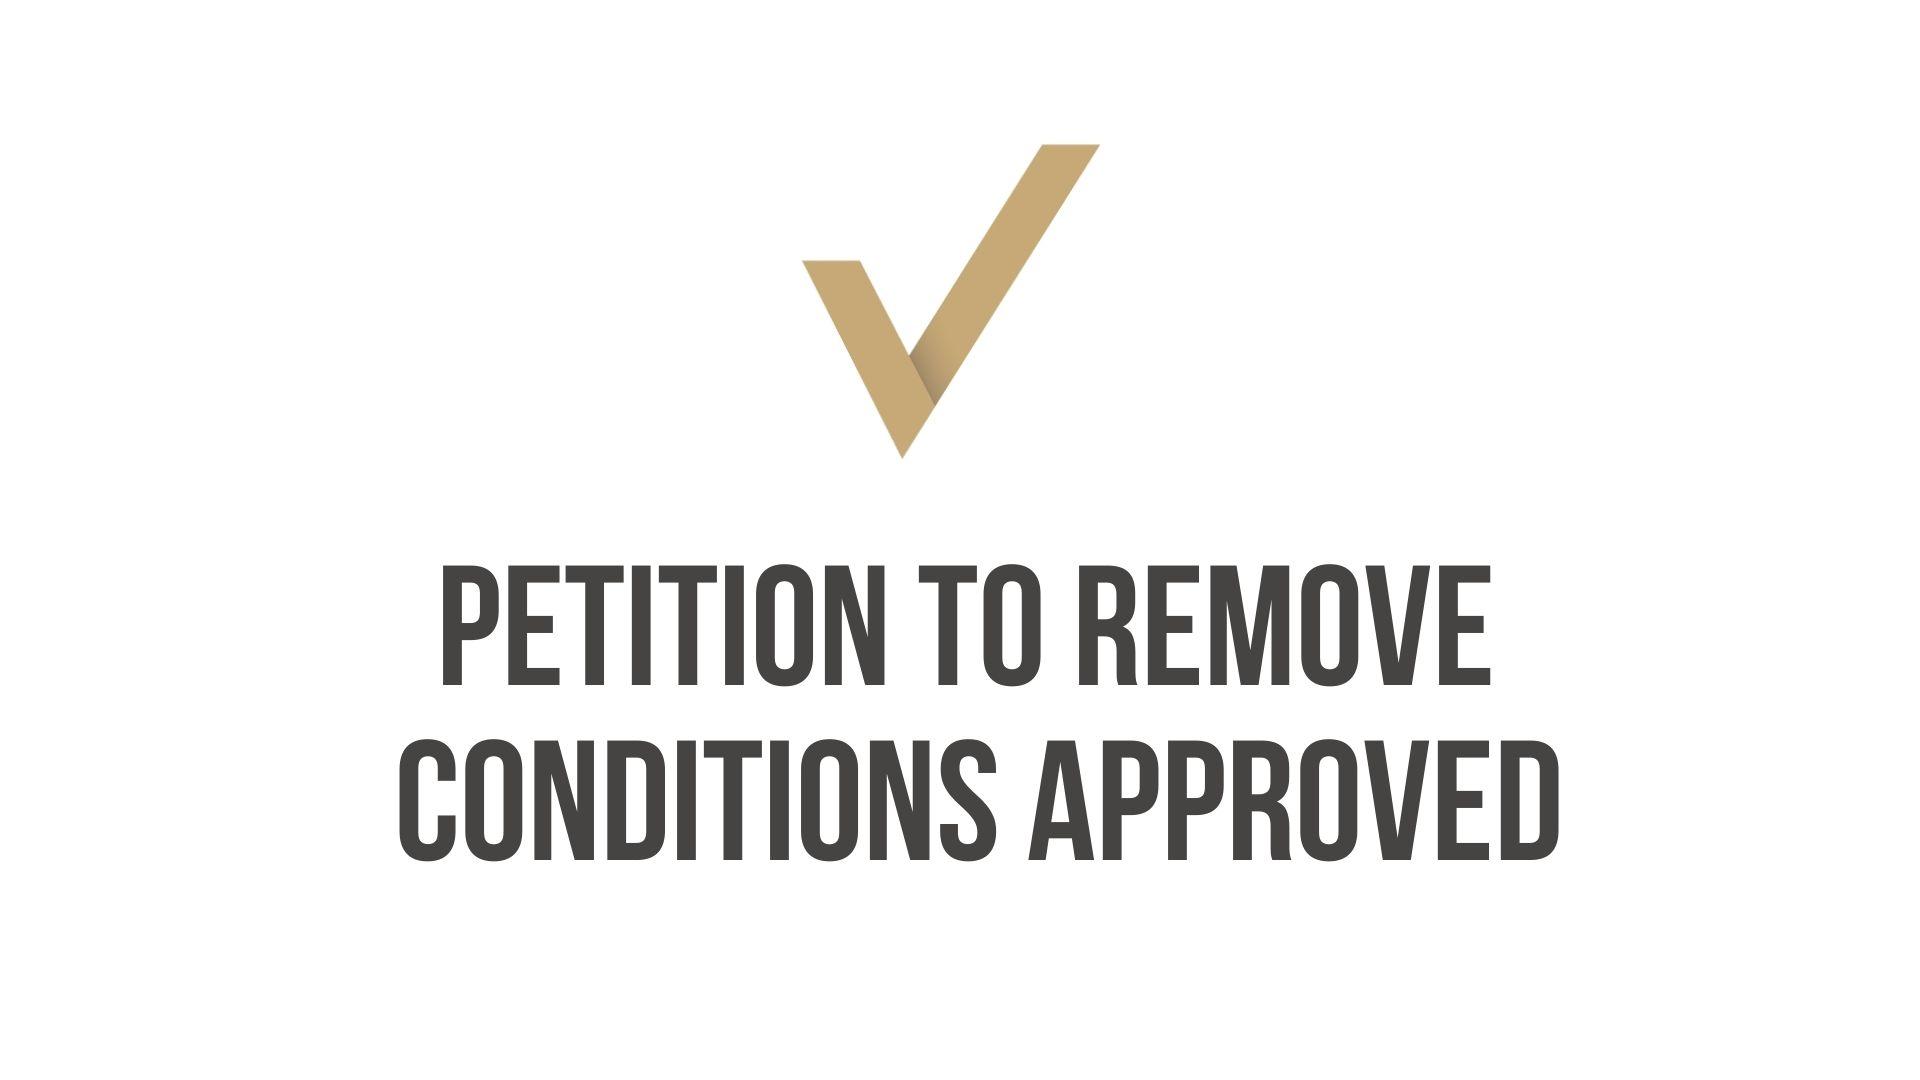 Petition to Remove Conditions Approval